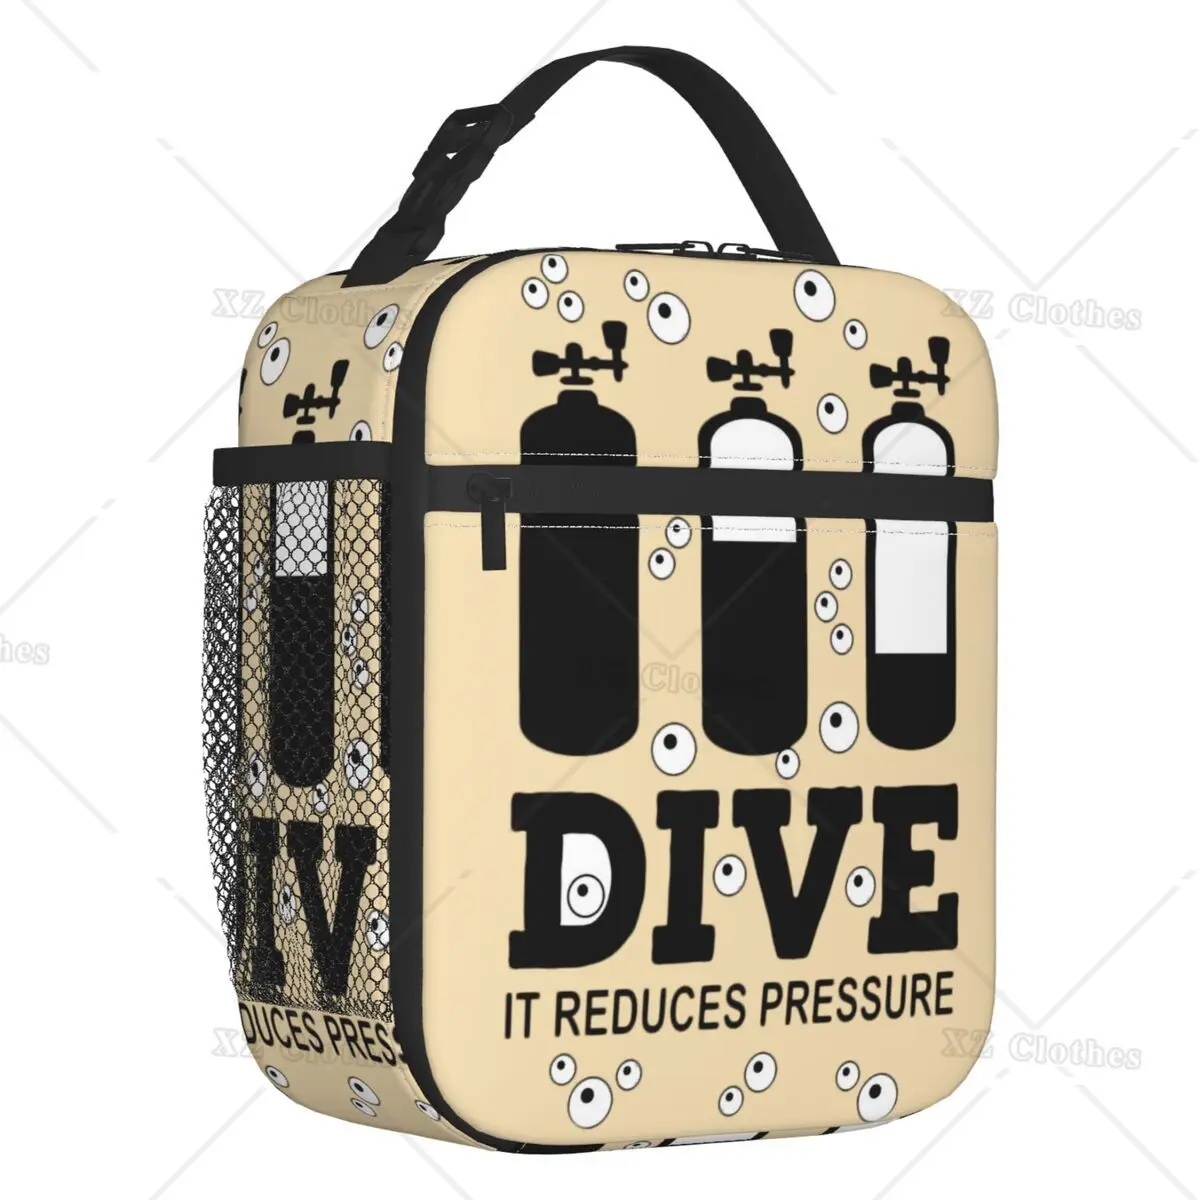 

Scuba Diving Insulated Lunch Bag for Men Women Kids Portable Dive Diver Quote Cooler Thermal Lunch Box Tote School Picnic Trip